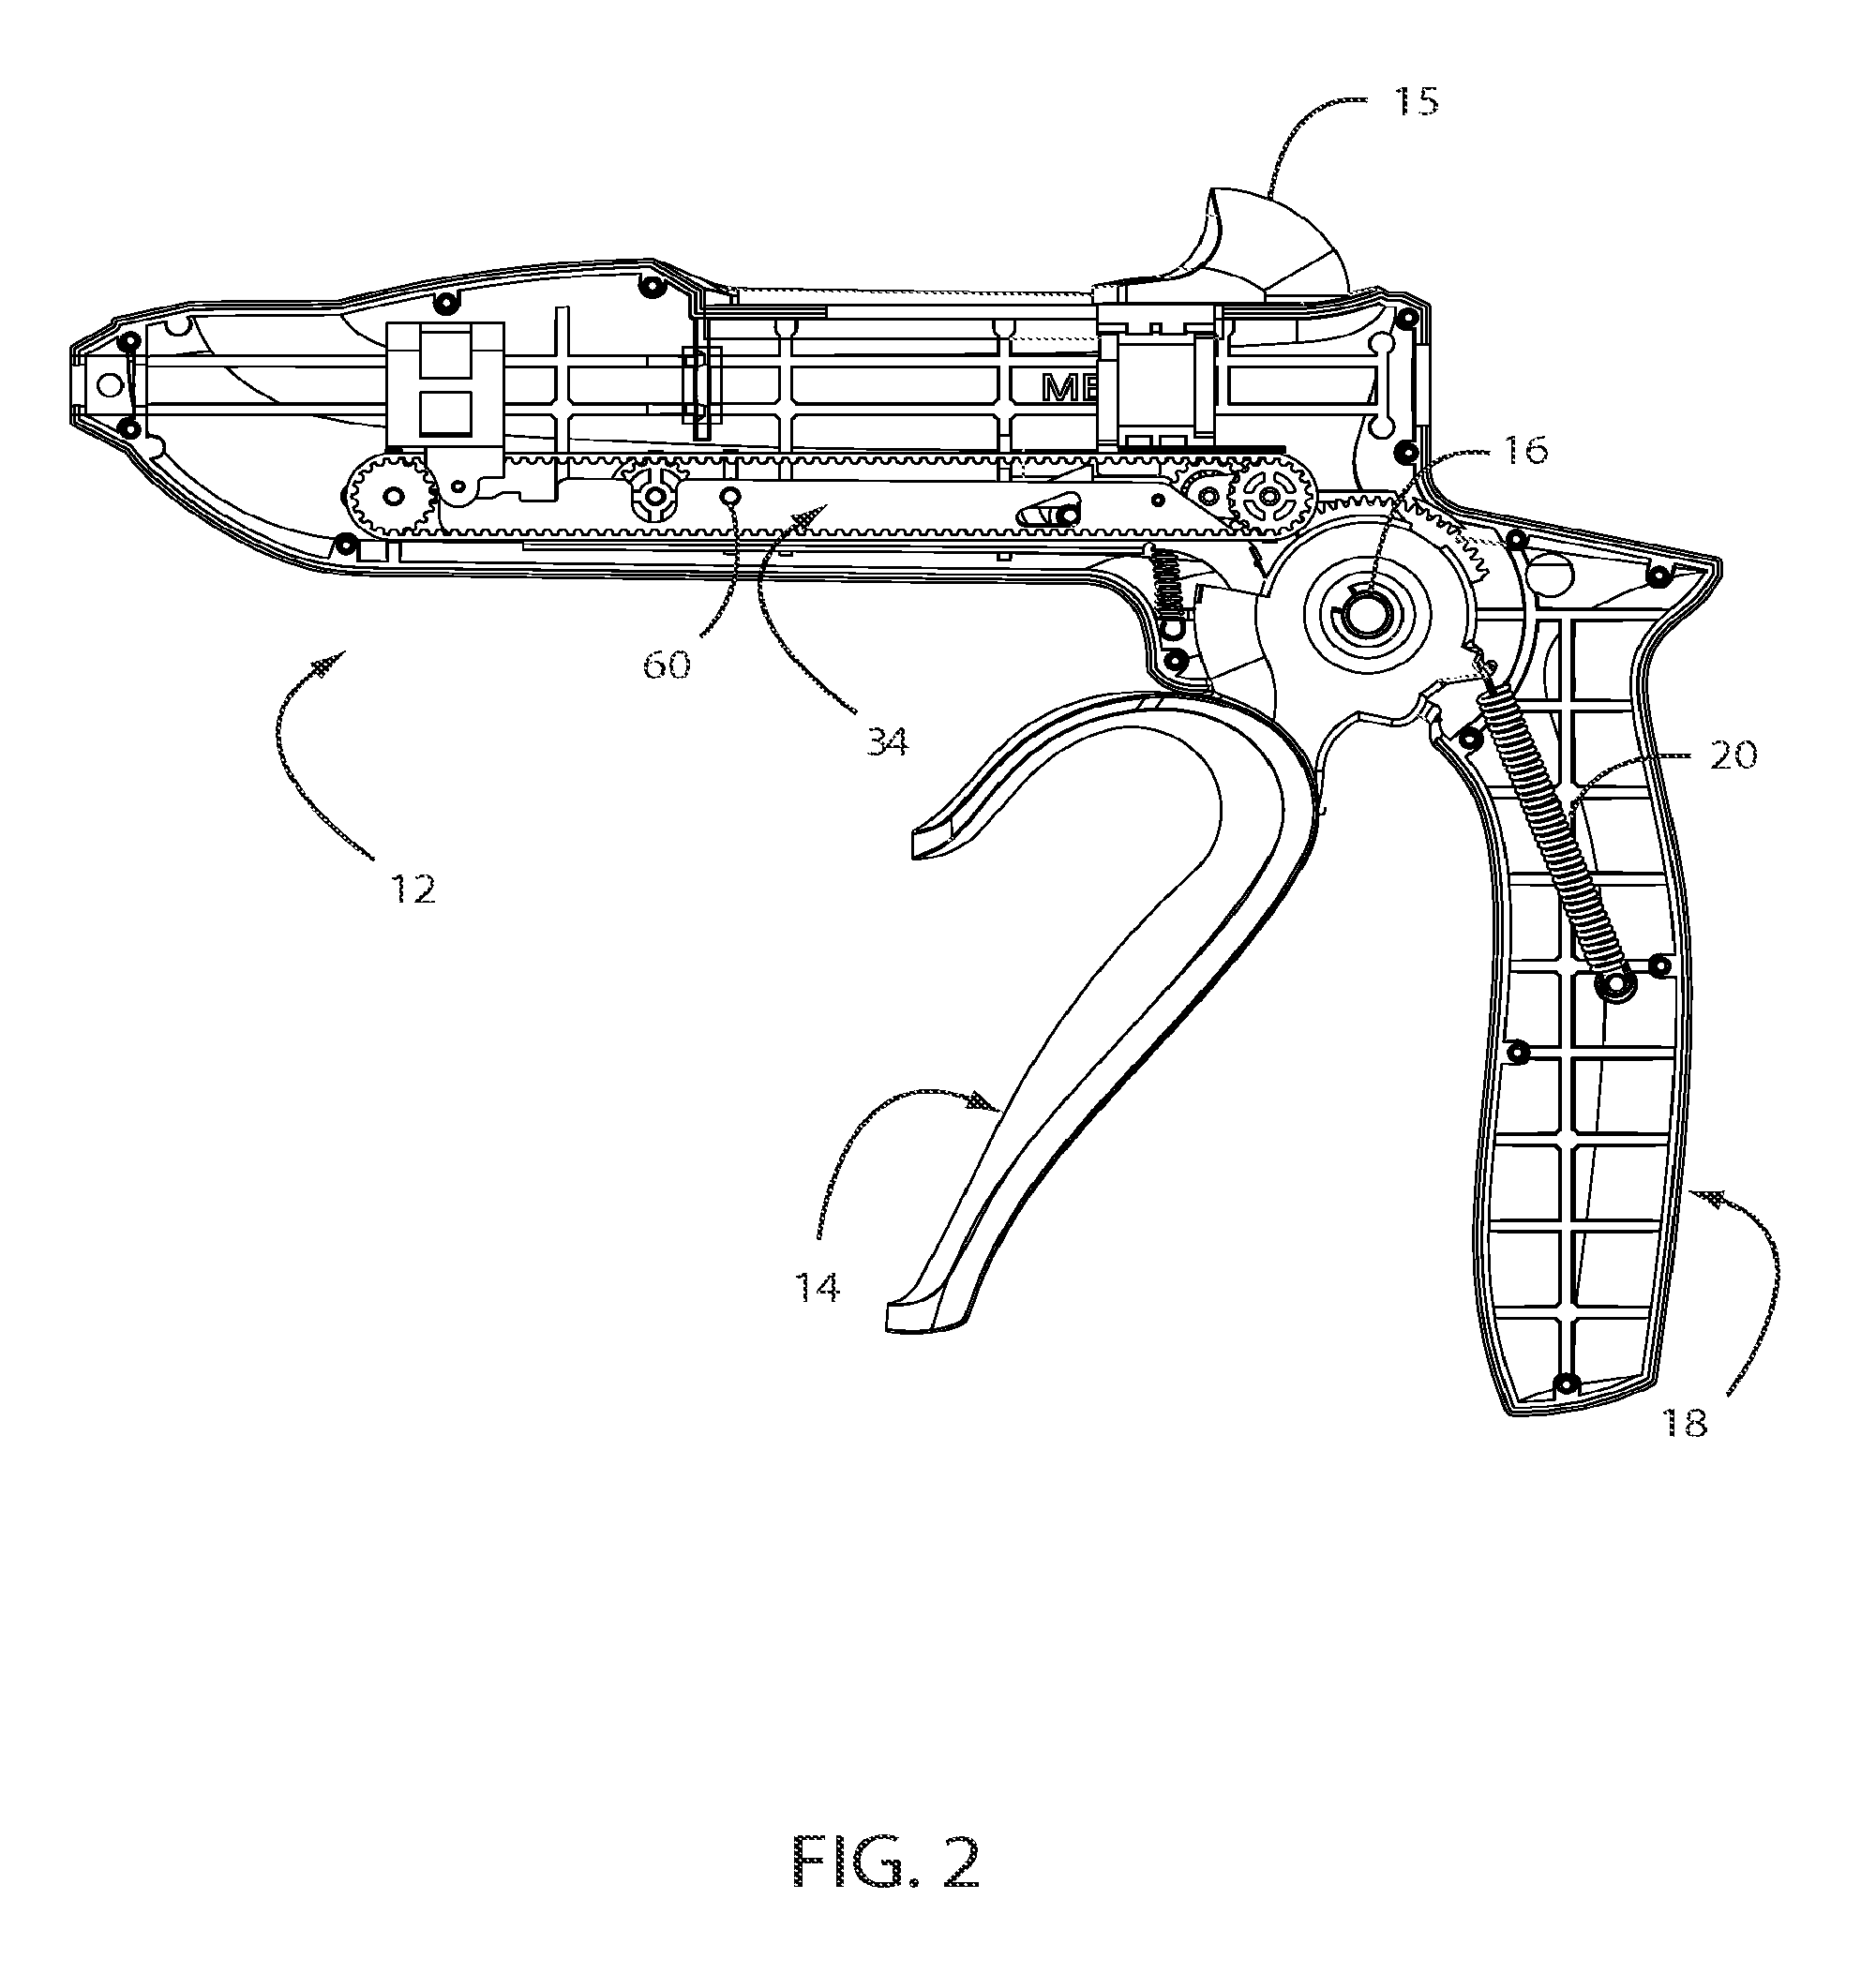 Single-trigger clamping and firing of surgical stapler